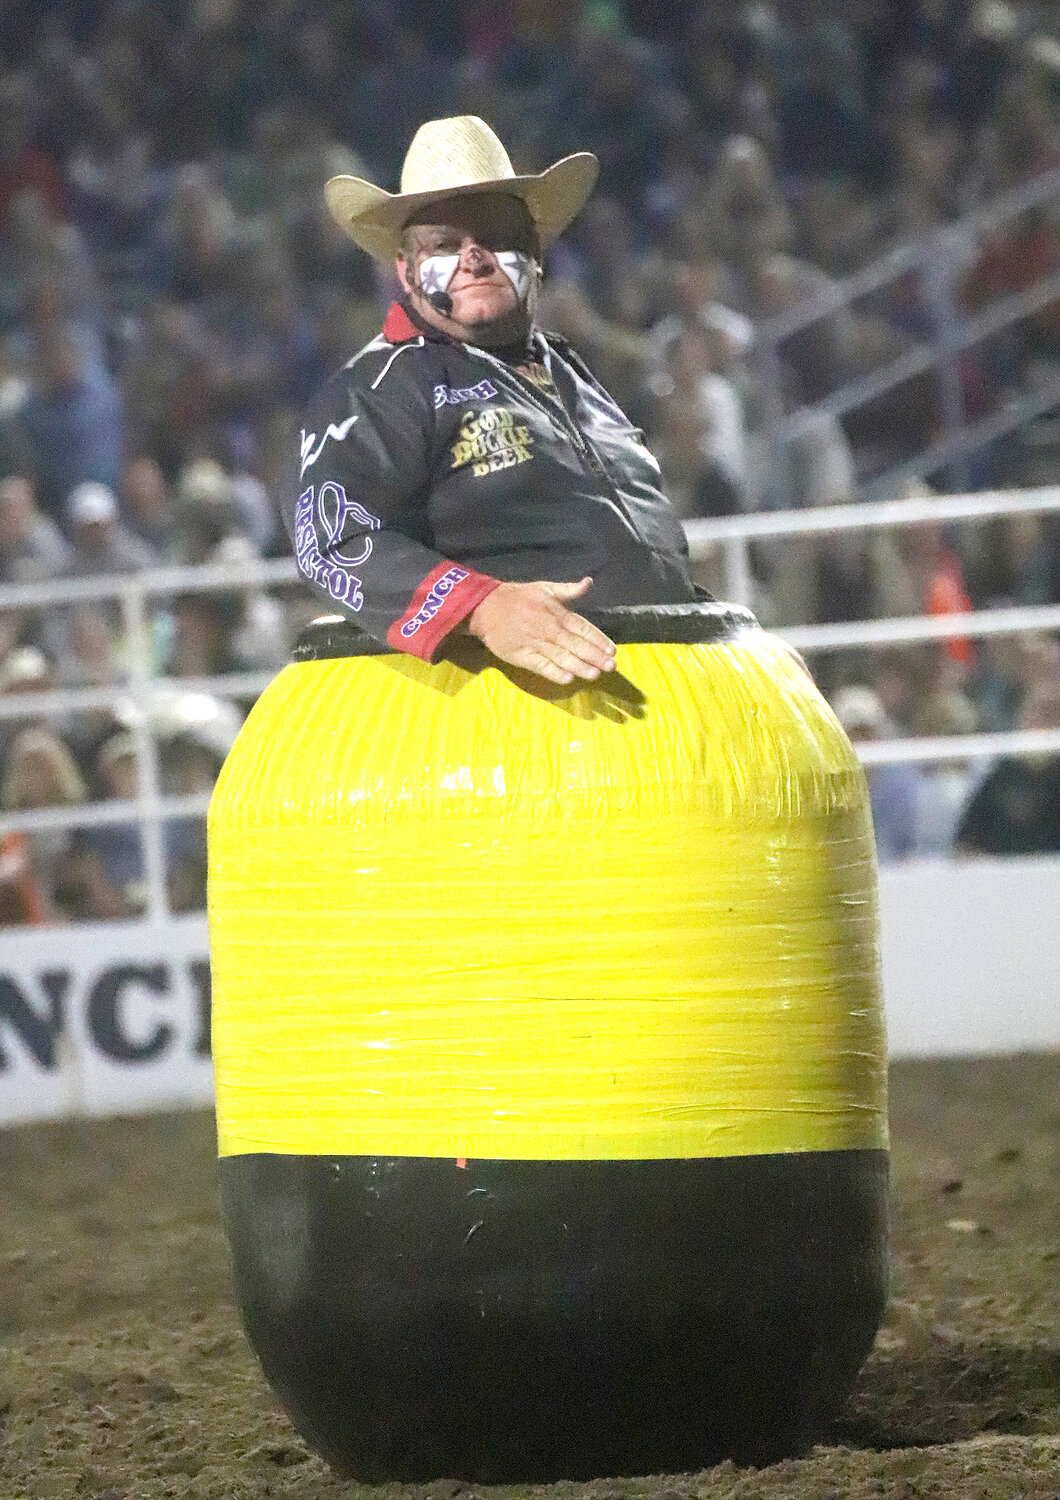 Rodeo clown and barrelman Justin Rumford has been a part of the Tri-State Rodeo for many years entertaining crowds and bringing laughter among the gasps of rodeo fans.